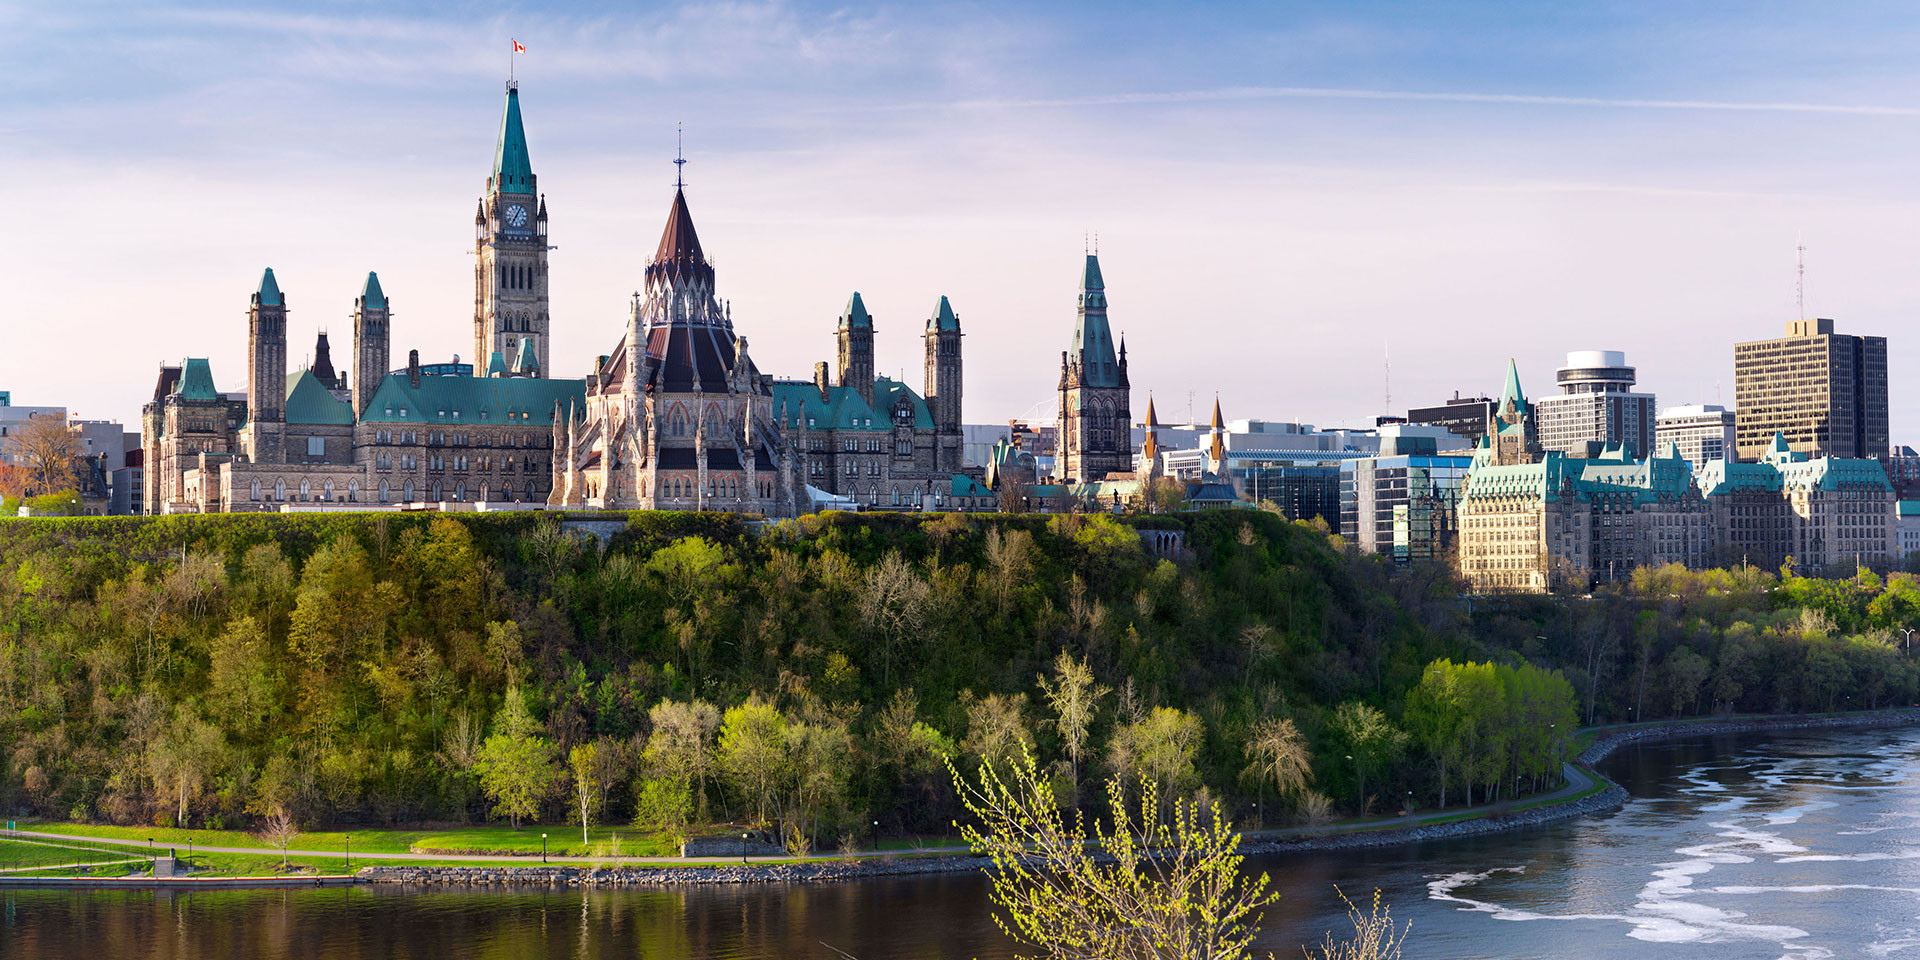 Ottawa will be the setting for the 2019 Ice Summit ©Wikipedia